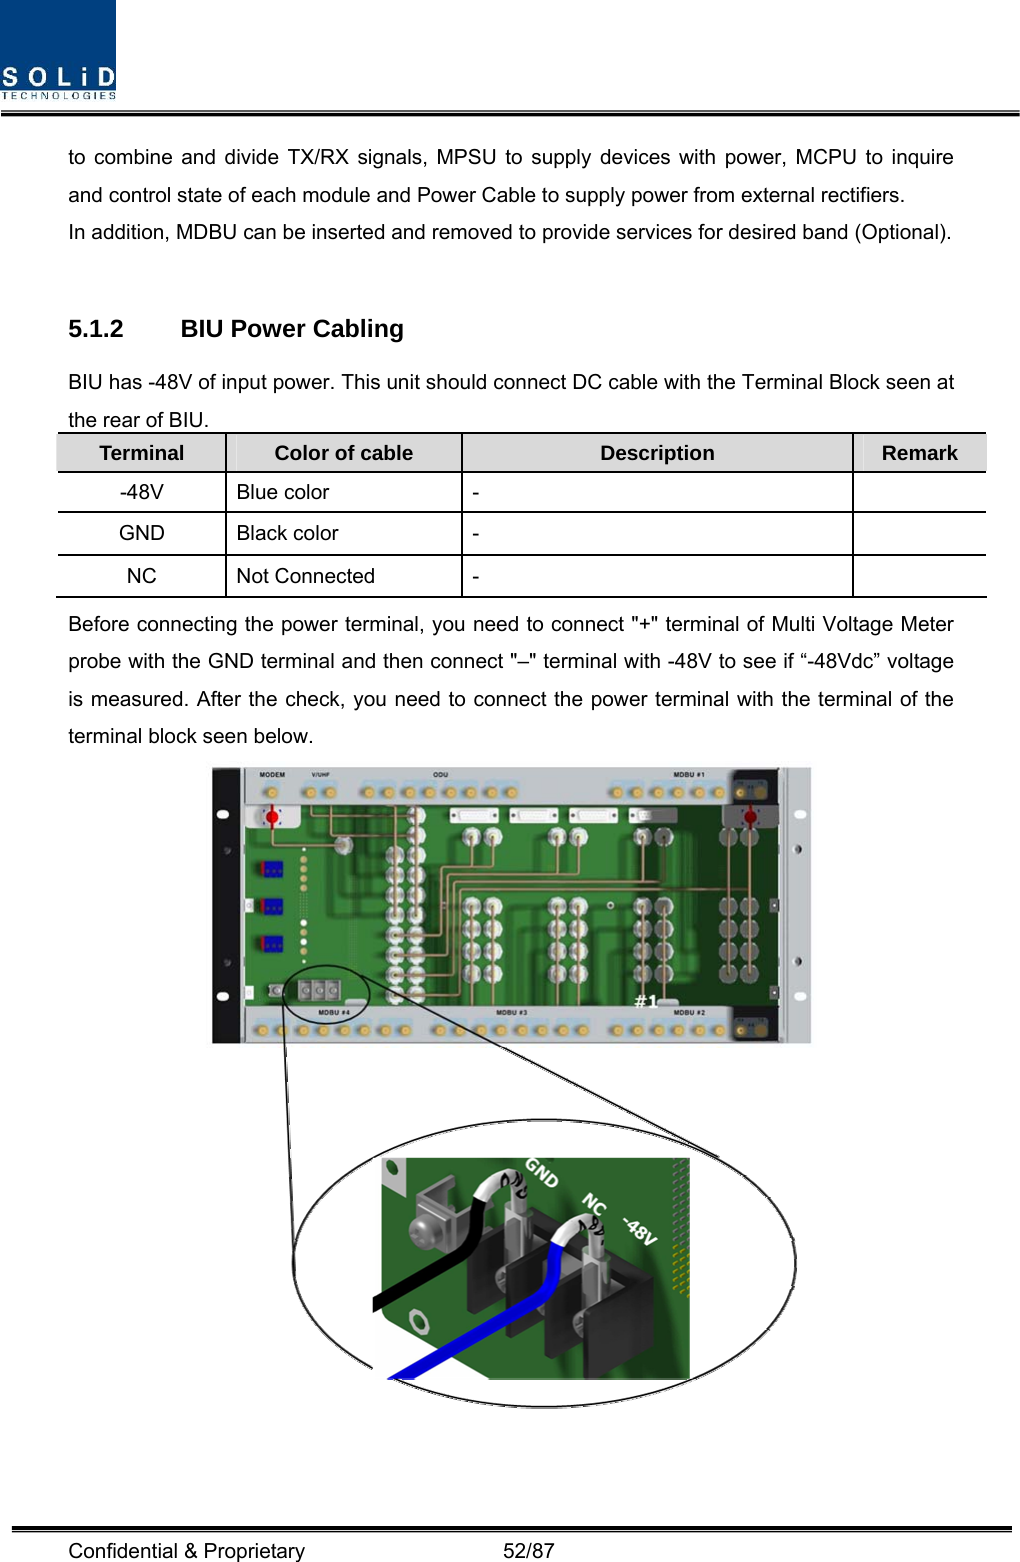  Confidential &amp; Proprietary                   52/87 to combine and divide TX/RX signals, MPSU to supply devices with power, MCPU to inquire and control state of each module and Power Cable to supply power from external rectifiers. In addition, MDBU can be inserted and removed to provide services for desired band (Optional).  5.1.2  BIU Power Cabling BIU has -48V of input power. This unit should connect DC cable with the Terminal Block seen at the rear of BIU. Terminal  Color of cable  Description  Remark -48V Blue color  -   GND Black color  -   NC Not Connected  -   Before connecting the power terminal, you need to connect &quot;+&quot; terminal of Multi Voltage Meter probe with the GND terminal and then connect &quot;–&quot; terminal with -48V to see if “-48Vdc” voltage is measured. After the check, you need to connect the power terminal with the terminal of the terminal block seen below.    